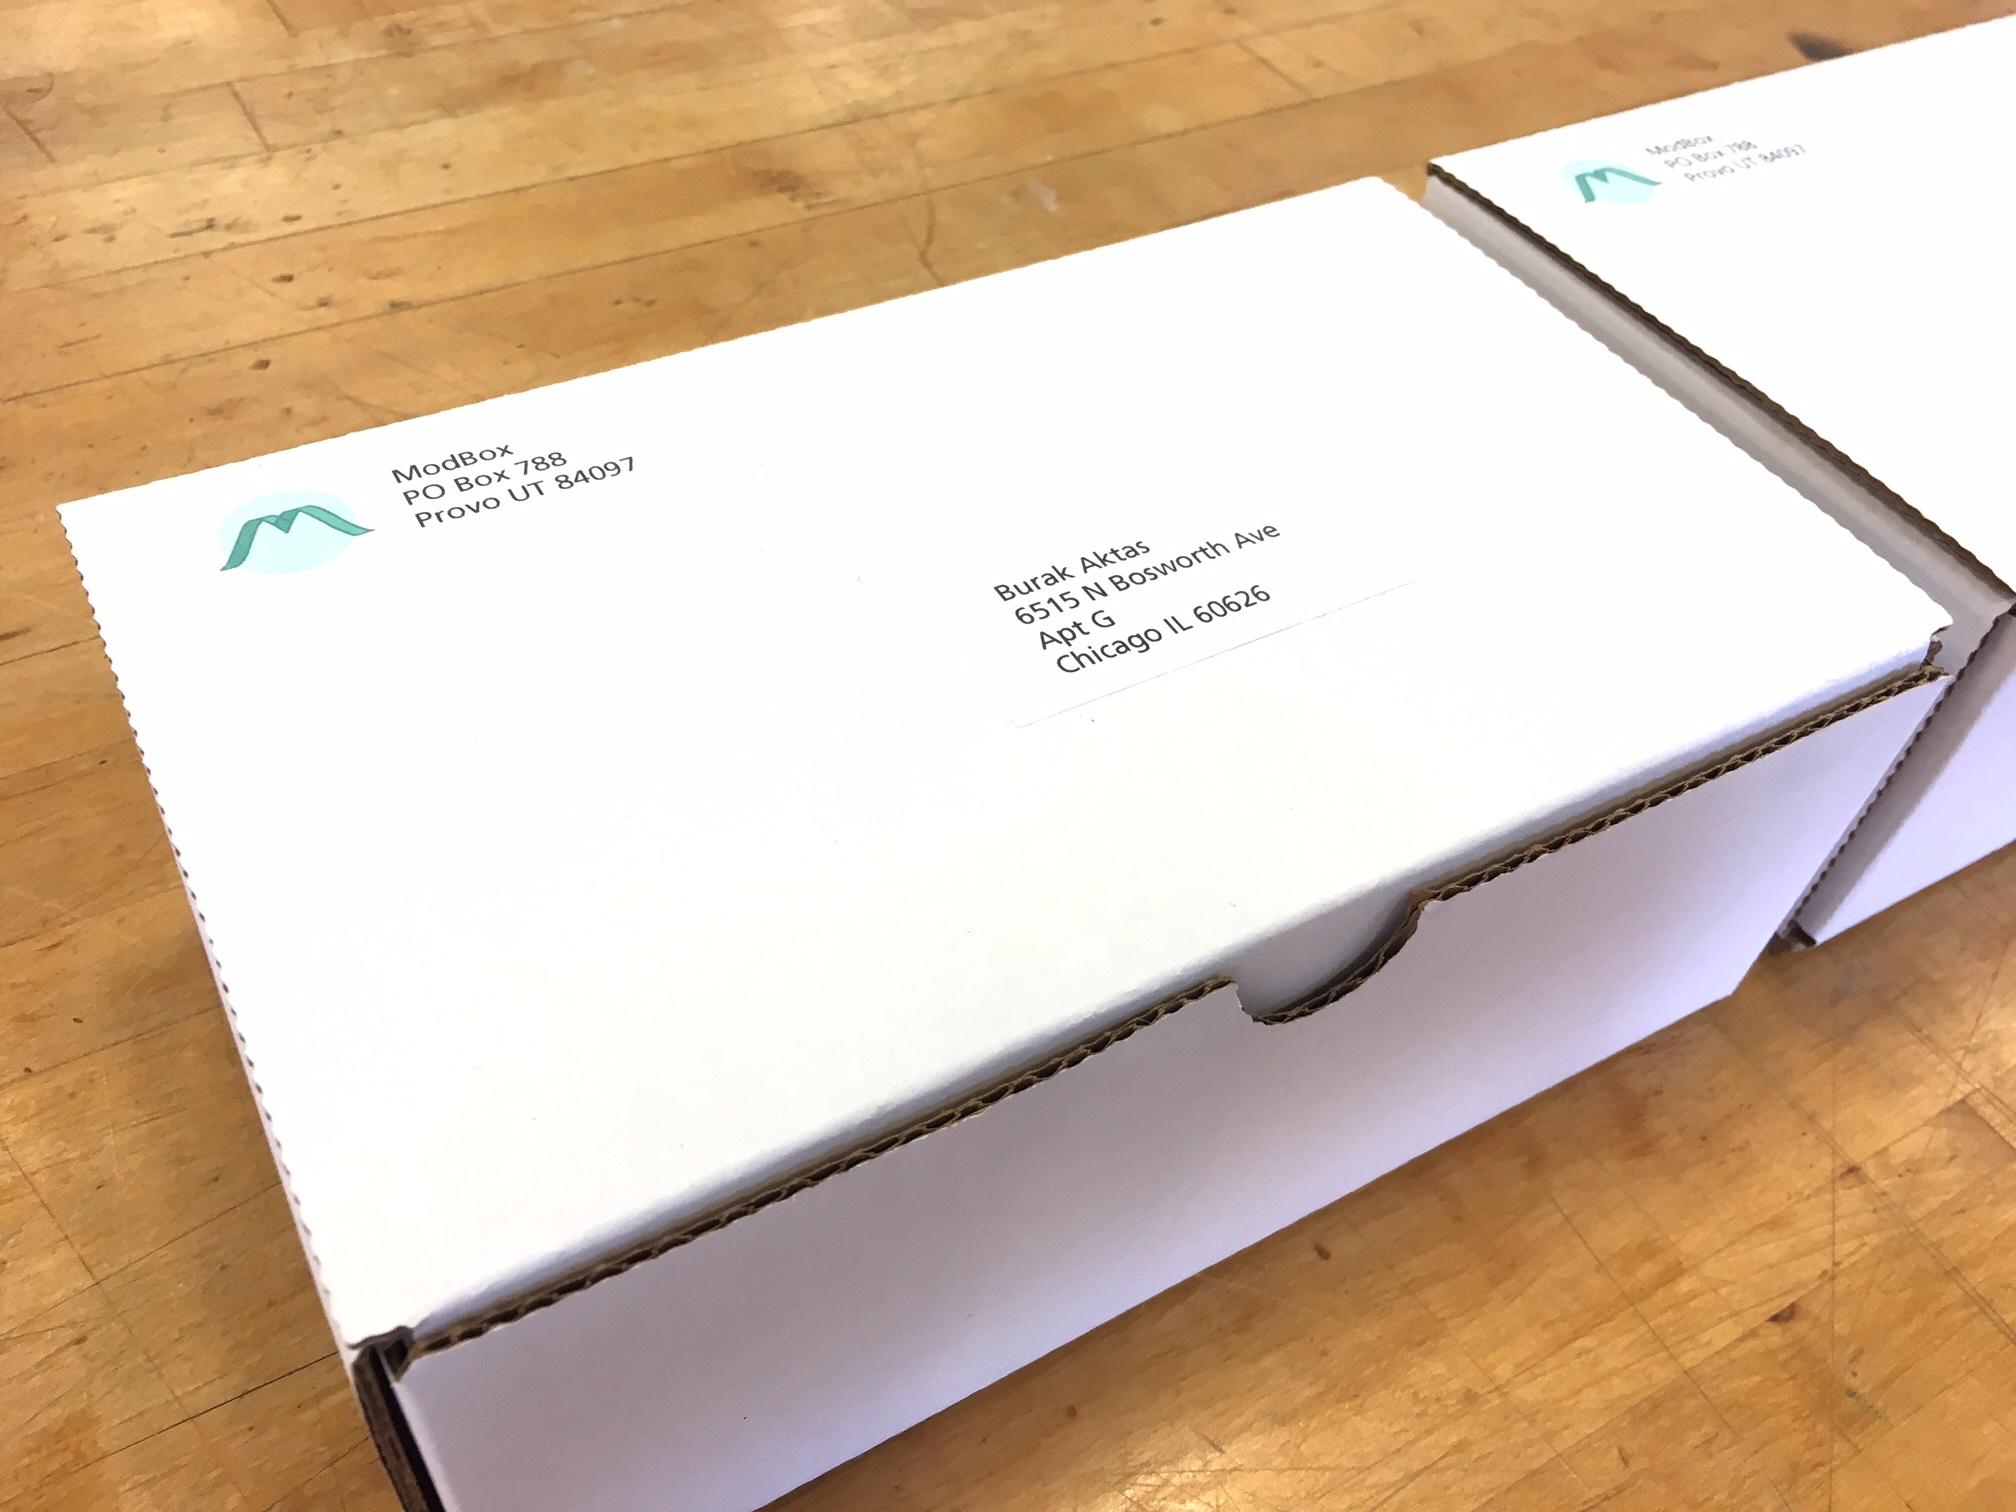 A white box is return addressed from a company called ModBox in Provo, Utah.